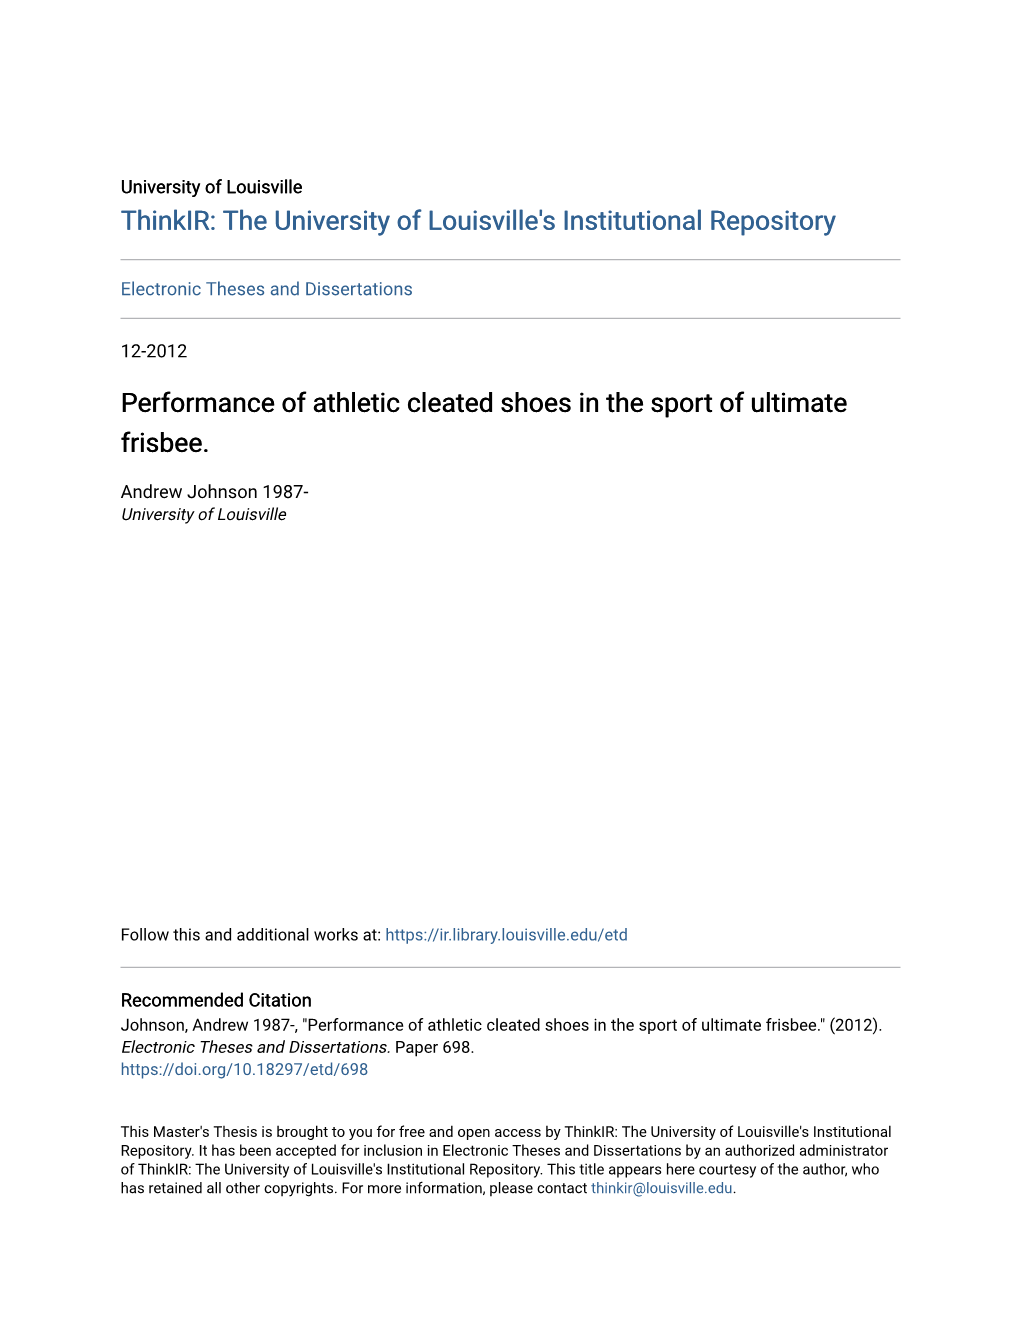 Performance of Athletic Cleated Shoes in the Sport of Ultimate Frisbee